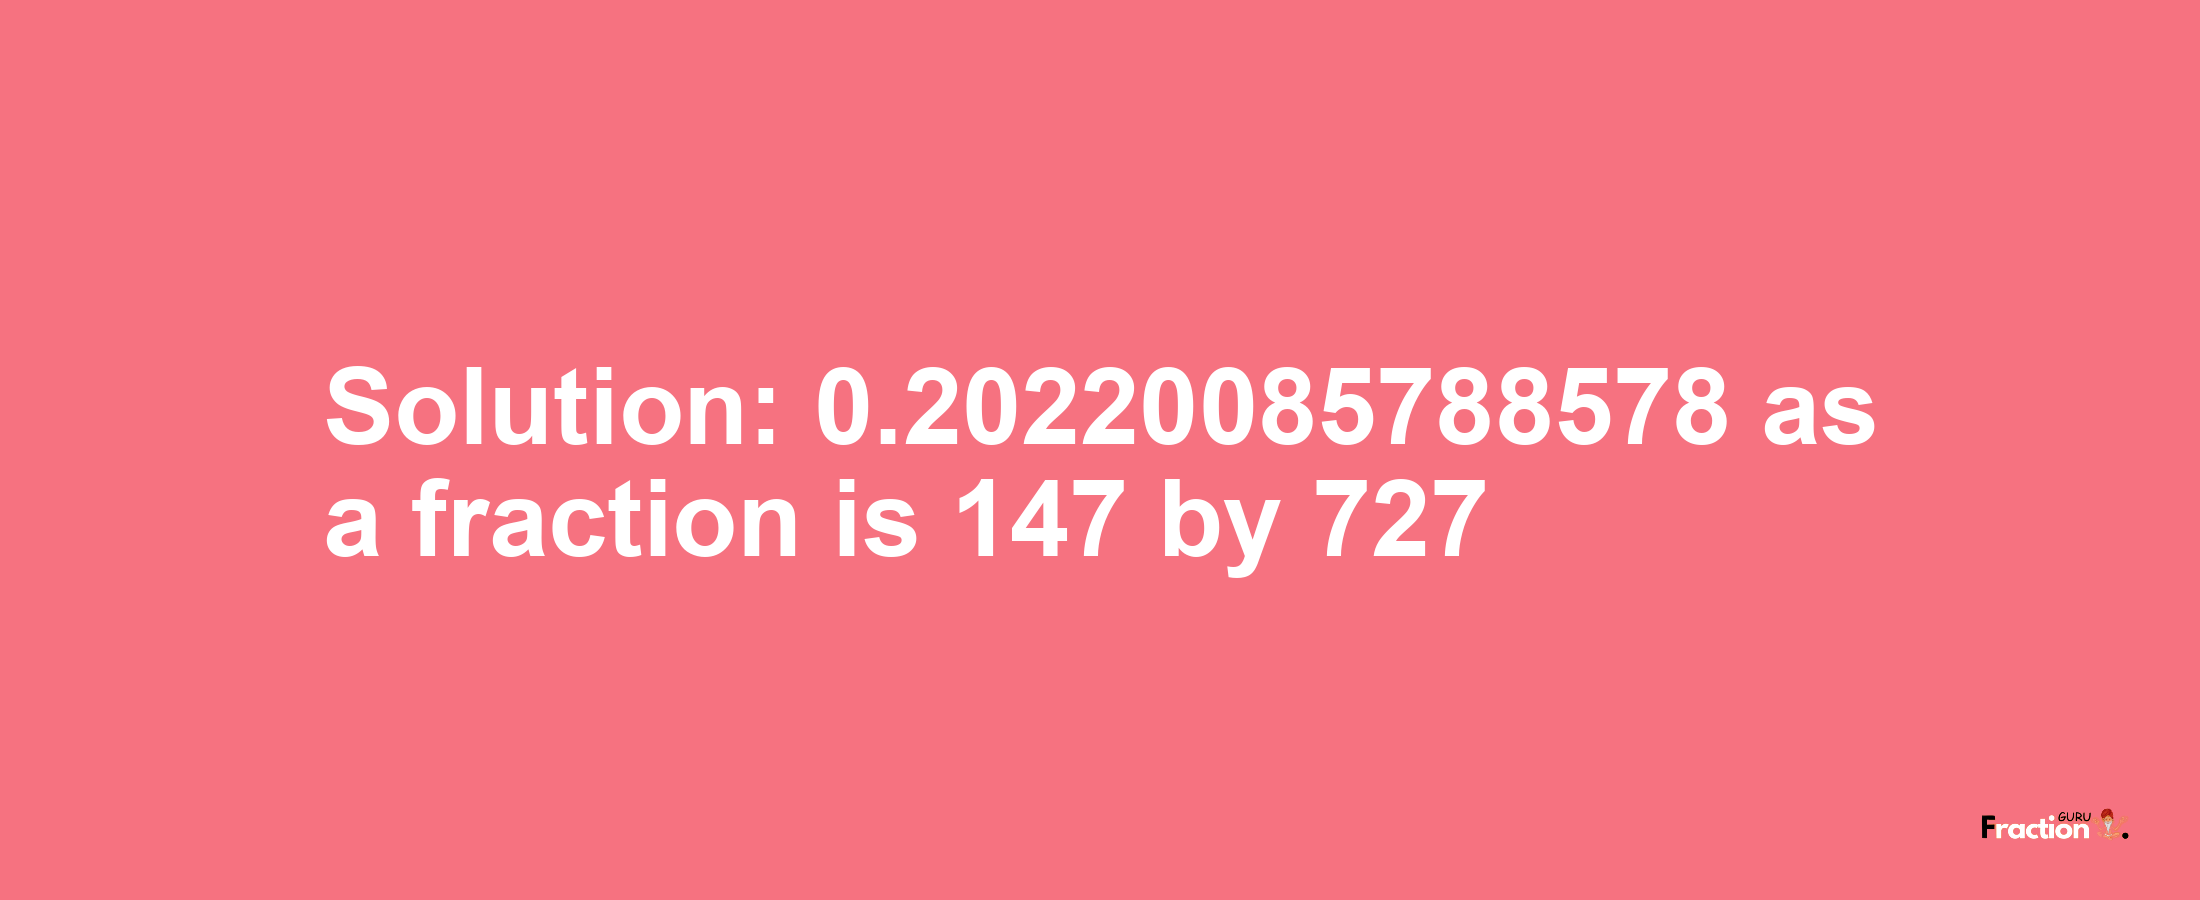 Solution:0.20220085788578 as a fraction is 147/727